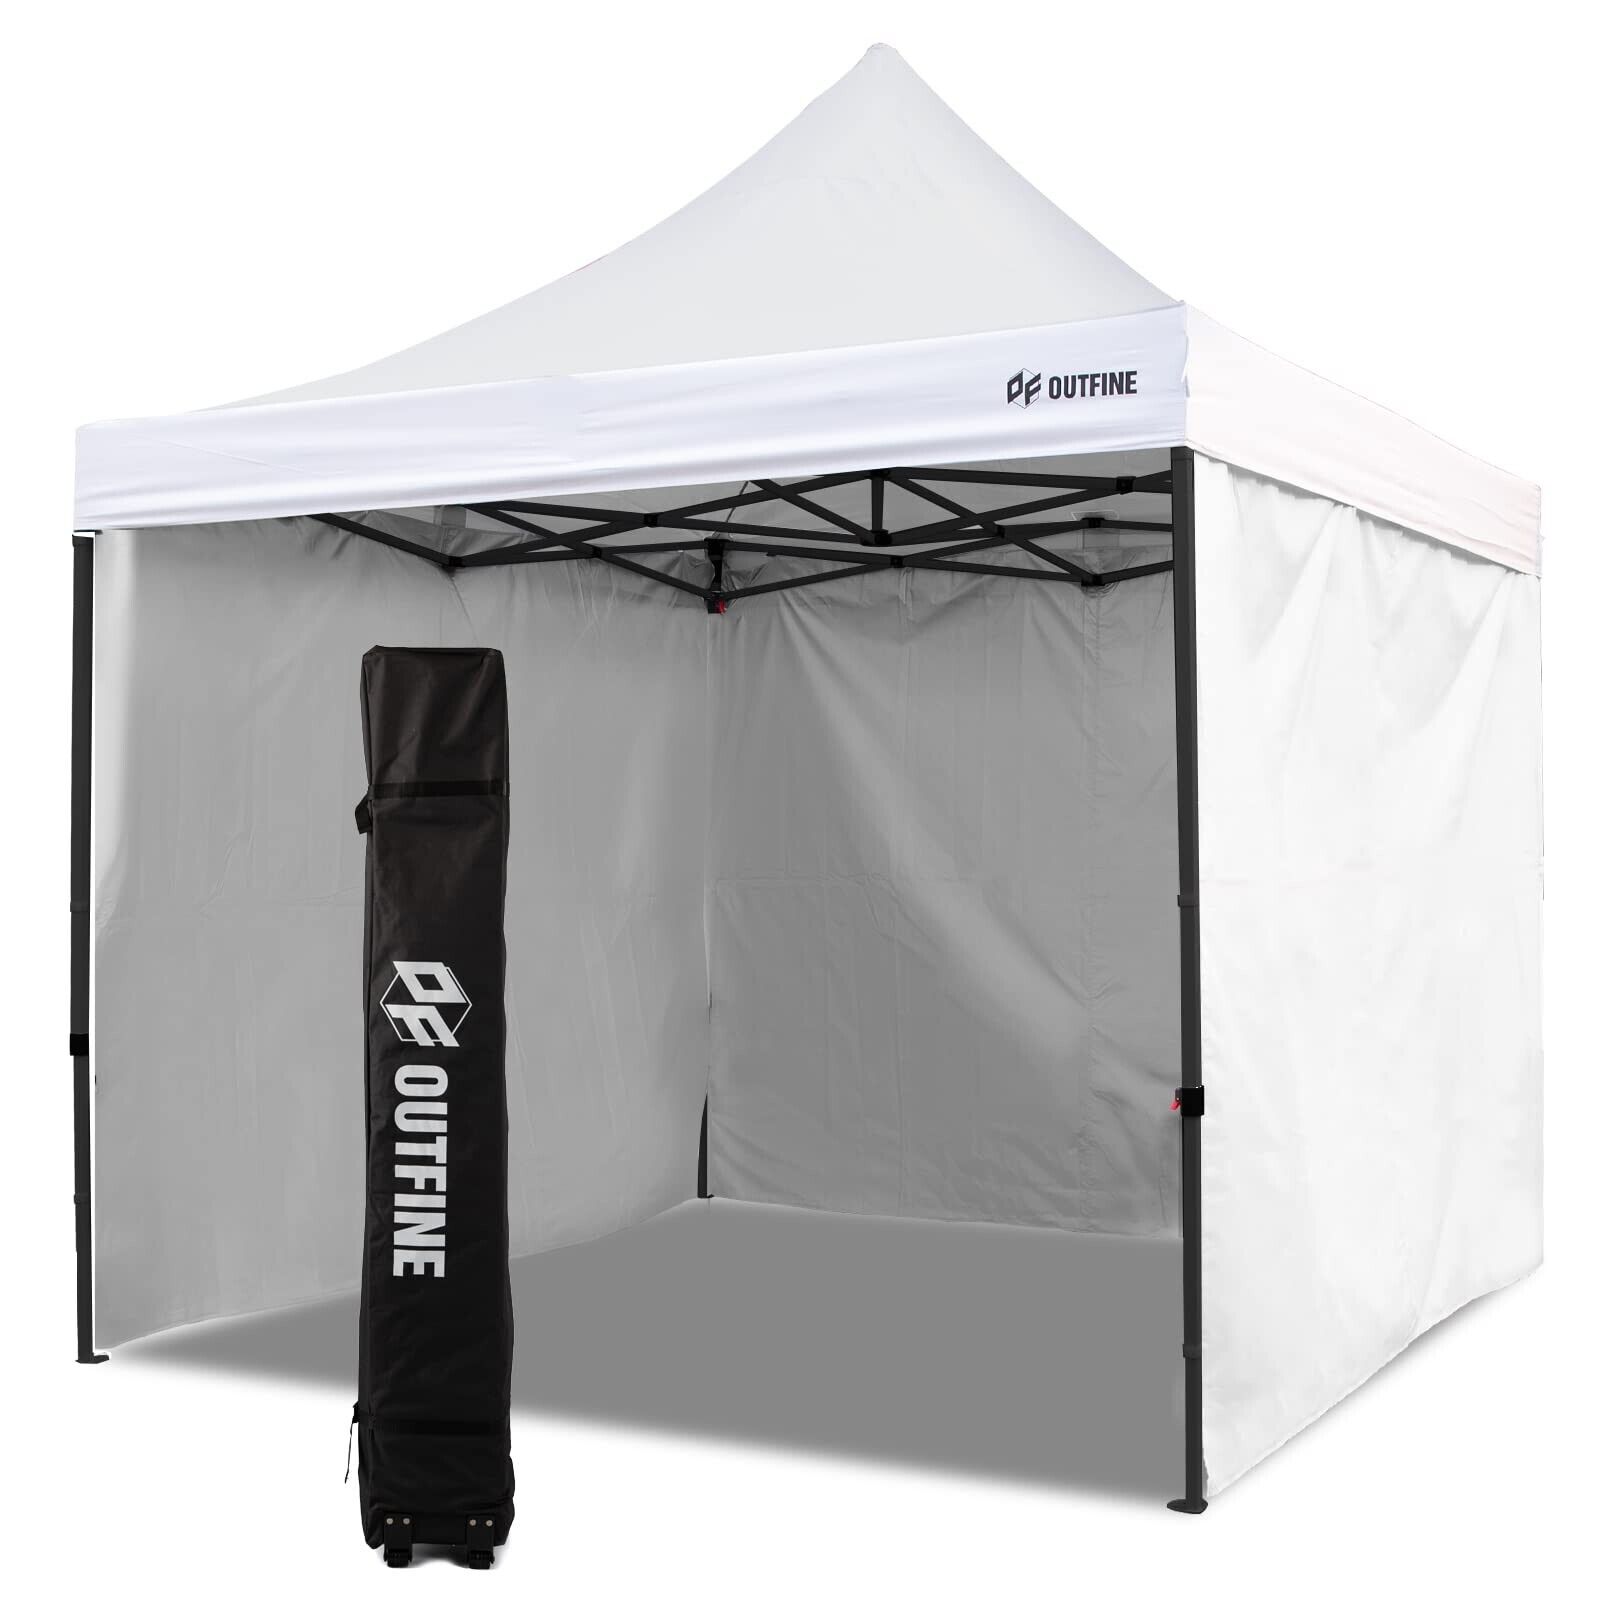 OUTFINE Canopy 10x10 Pop Up Commercial Canopy Tent with 3 Side Walls Instant ...